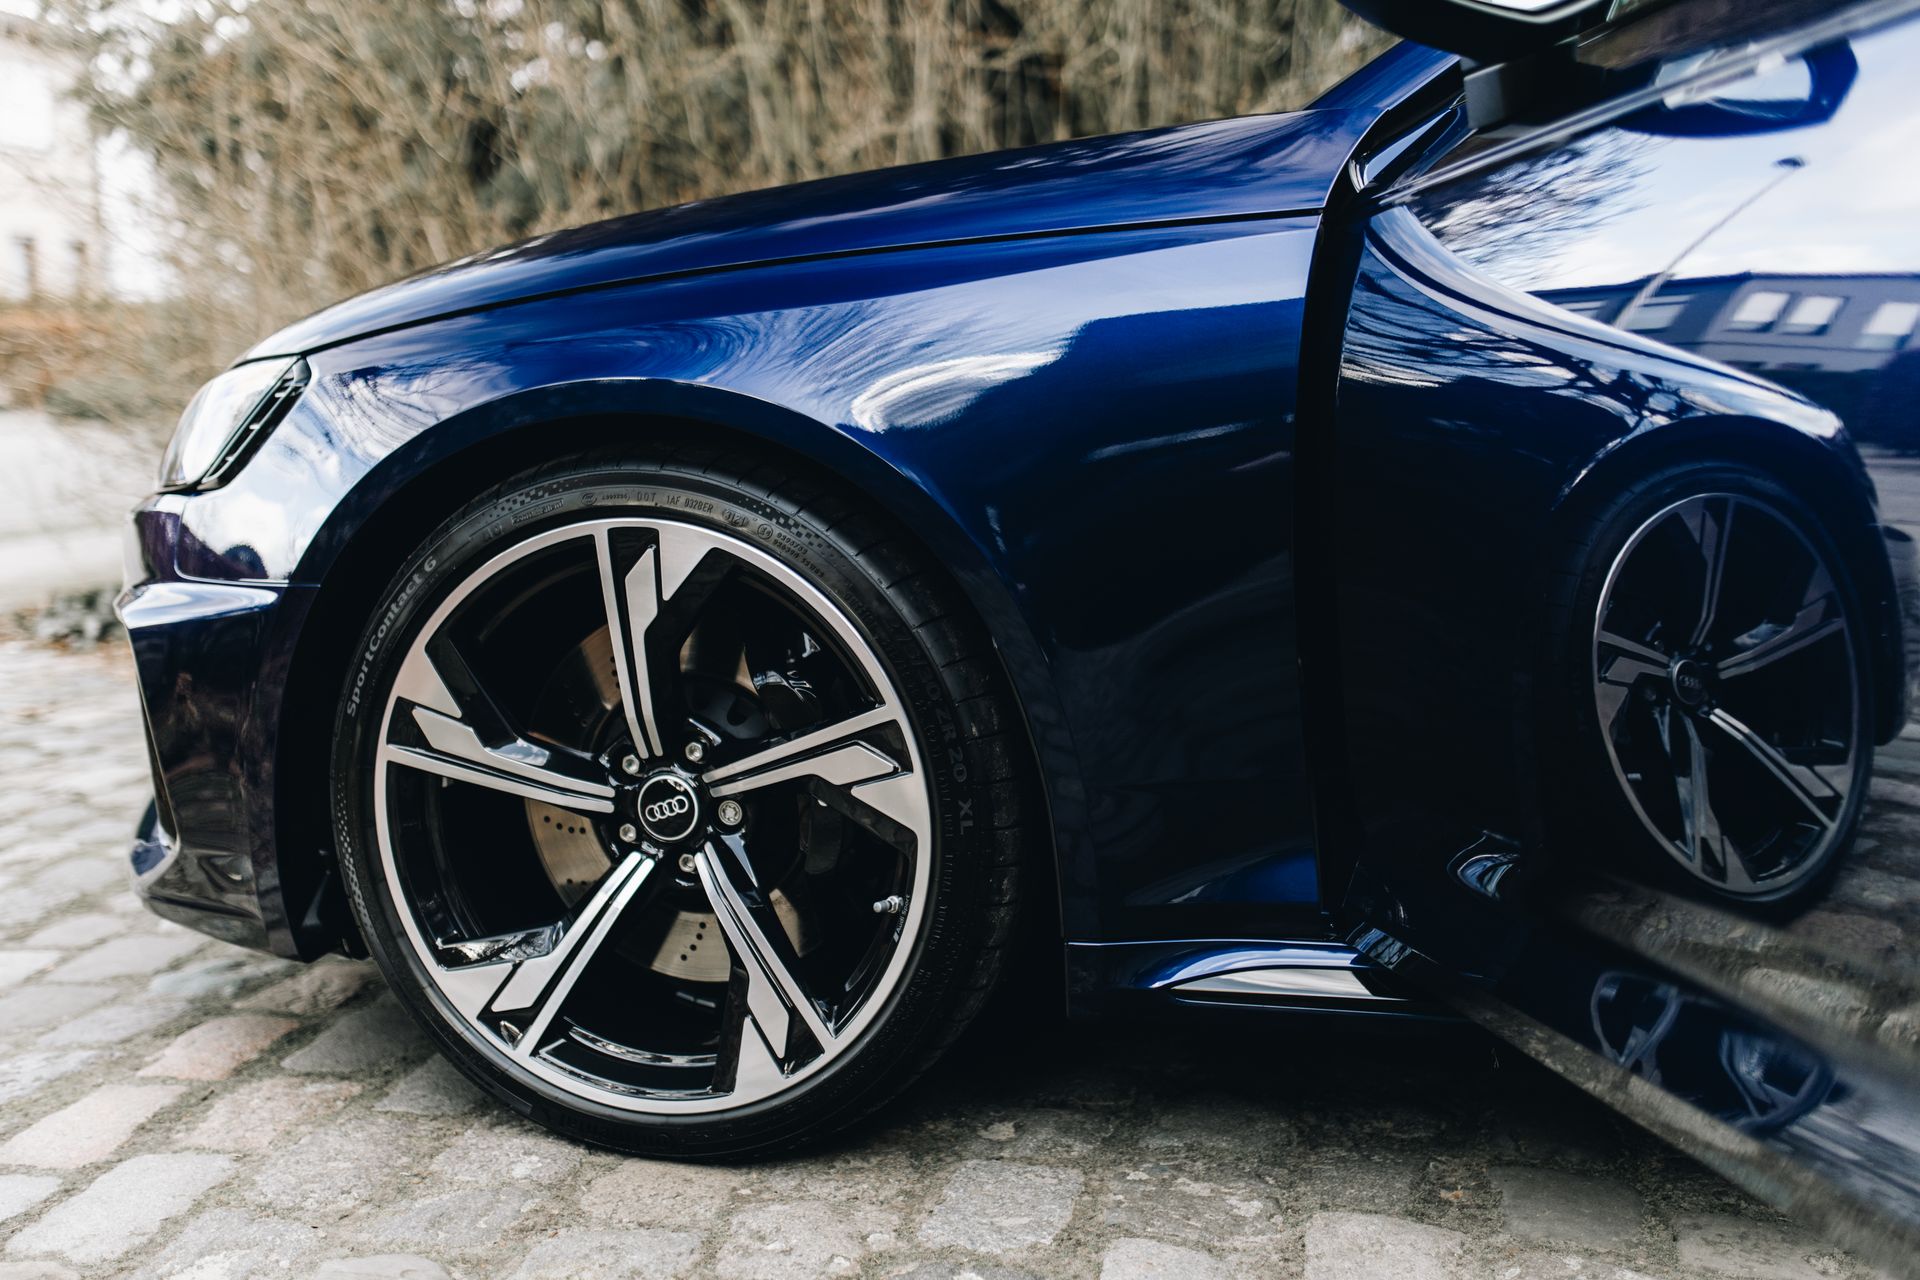 Westchester Car Wash vs Car Detailing - What's the Difference?